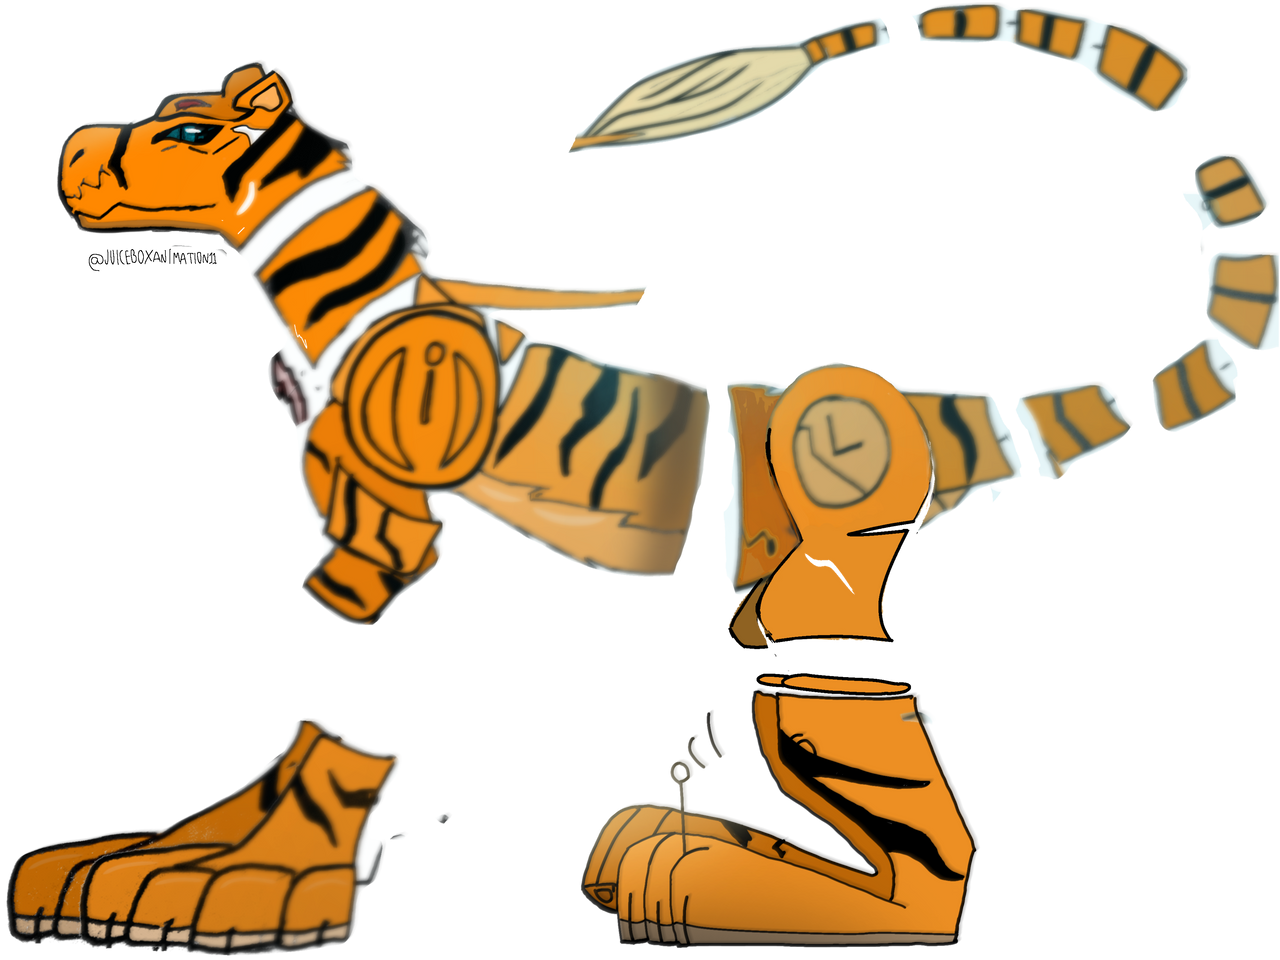 Terri the tiger by juiceboxanimation on